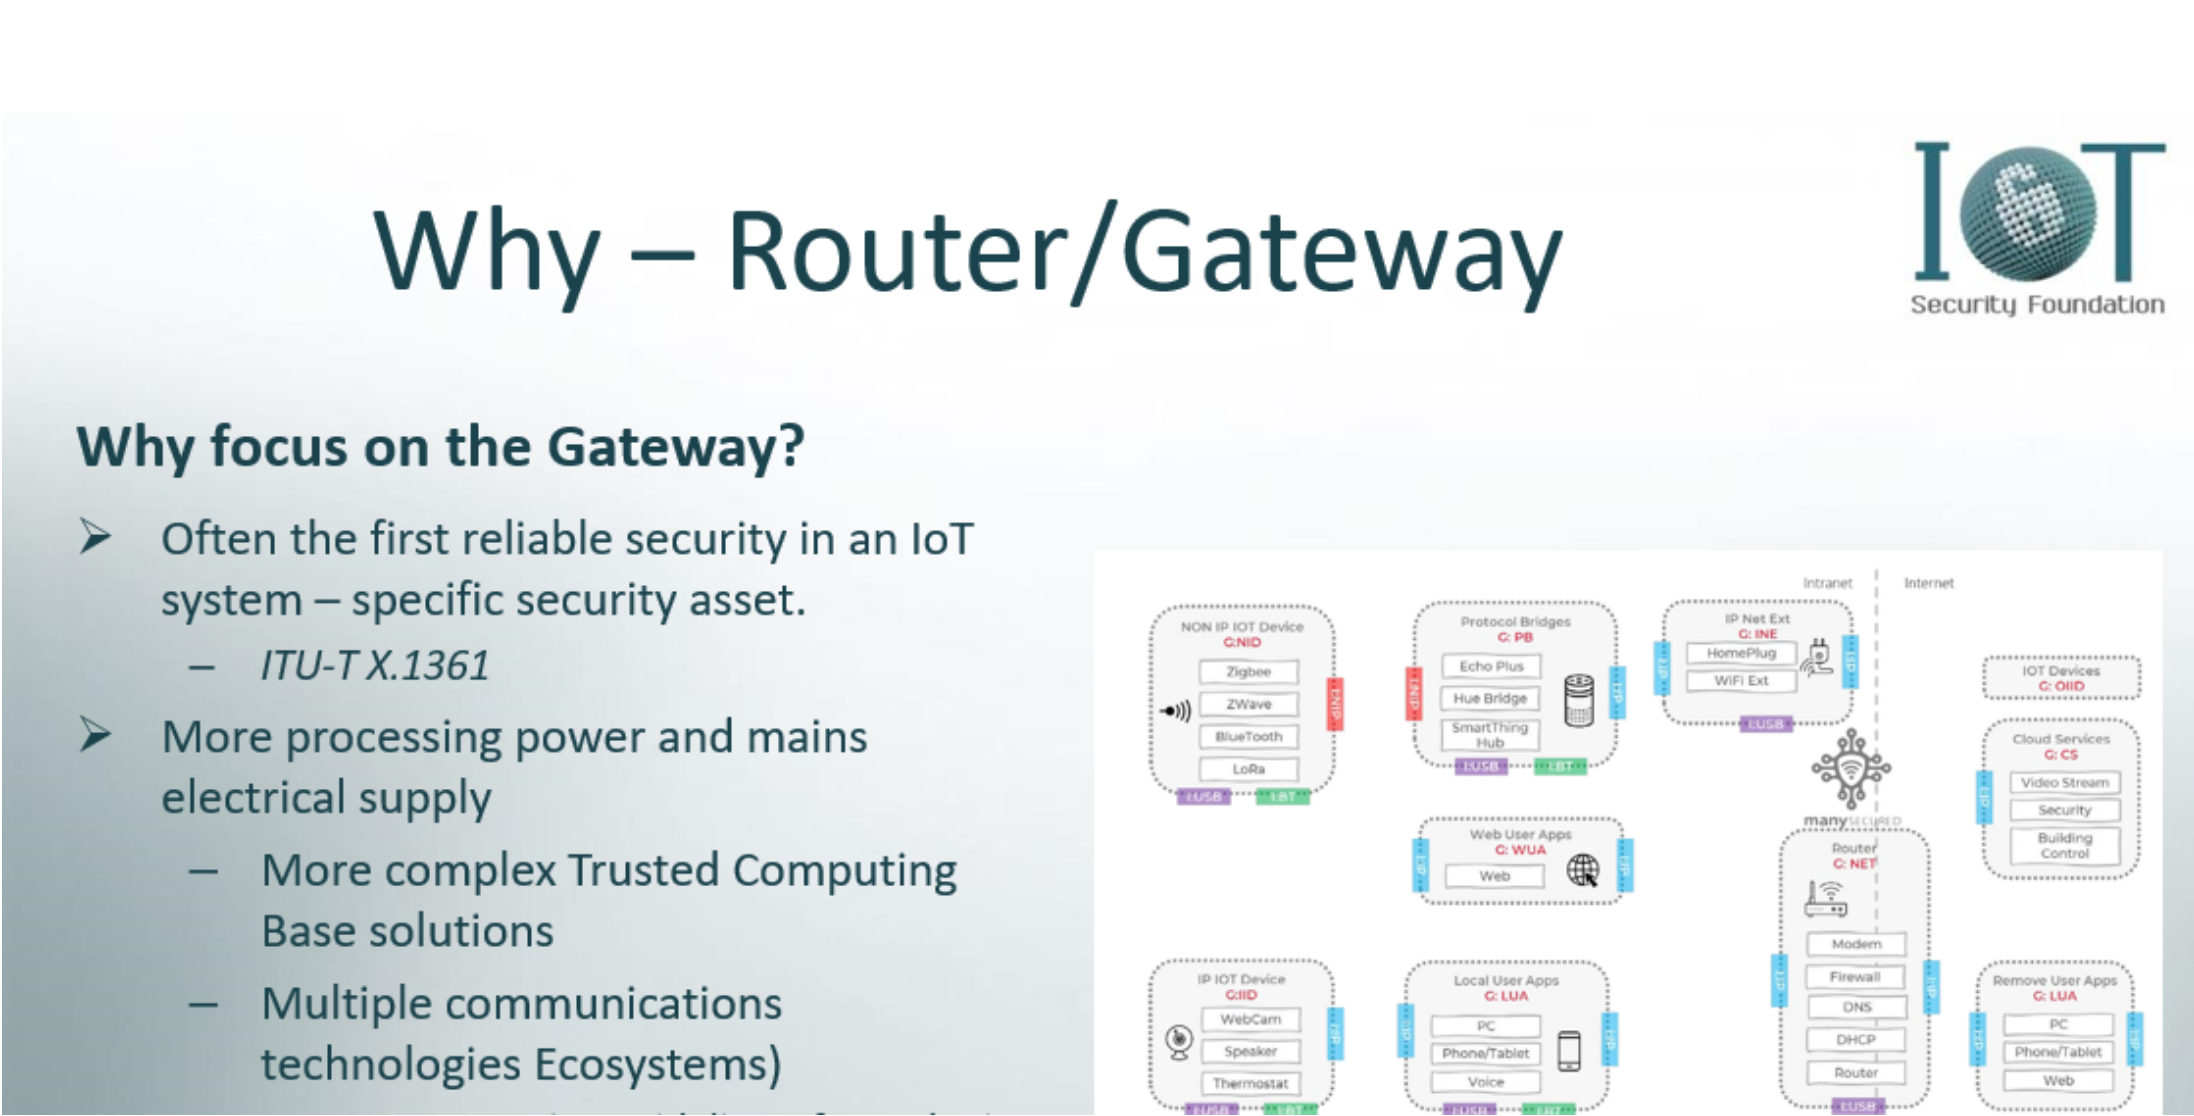 ManySecured Cyber Security Requirements For Routers And IoT Gateways